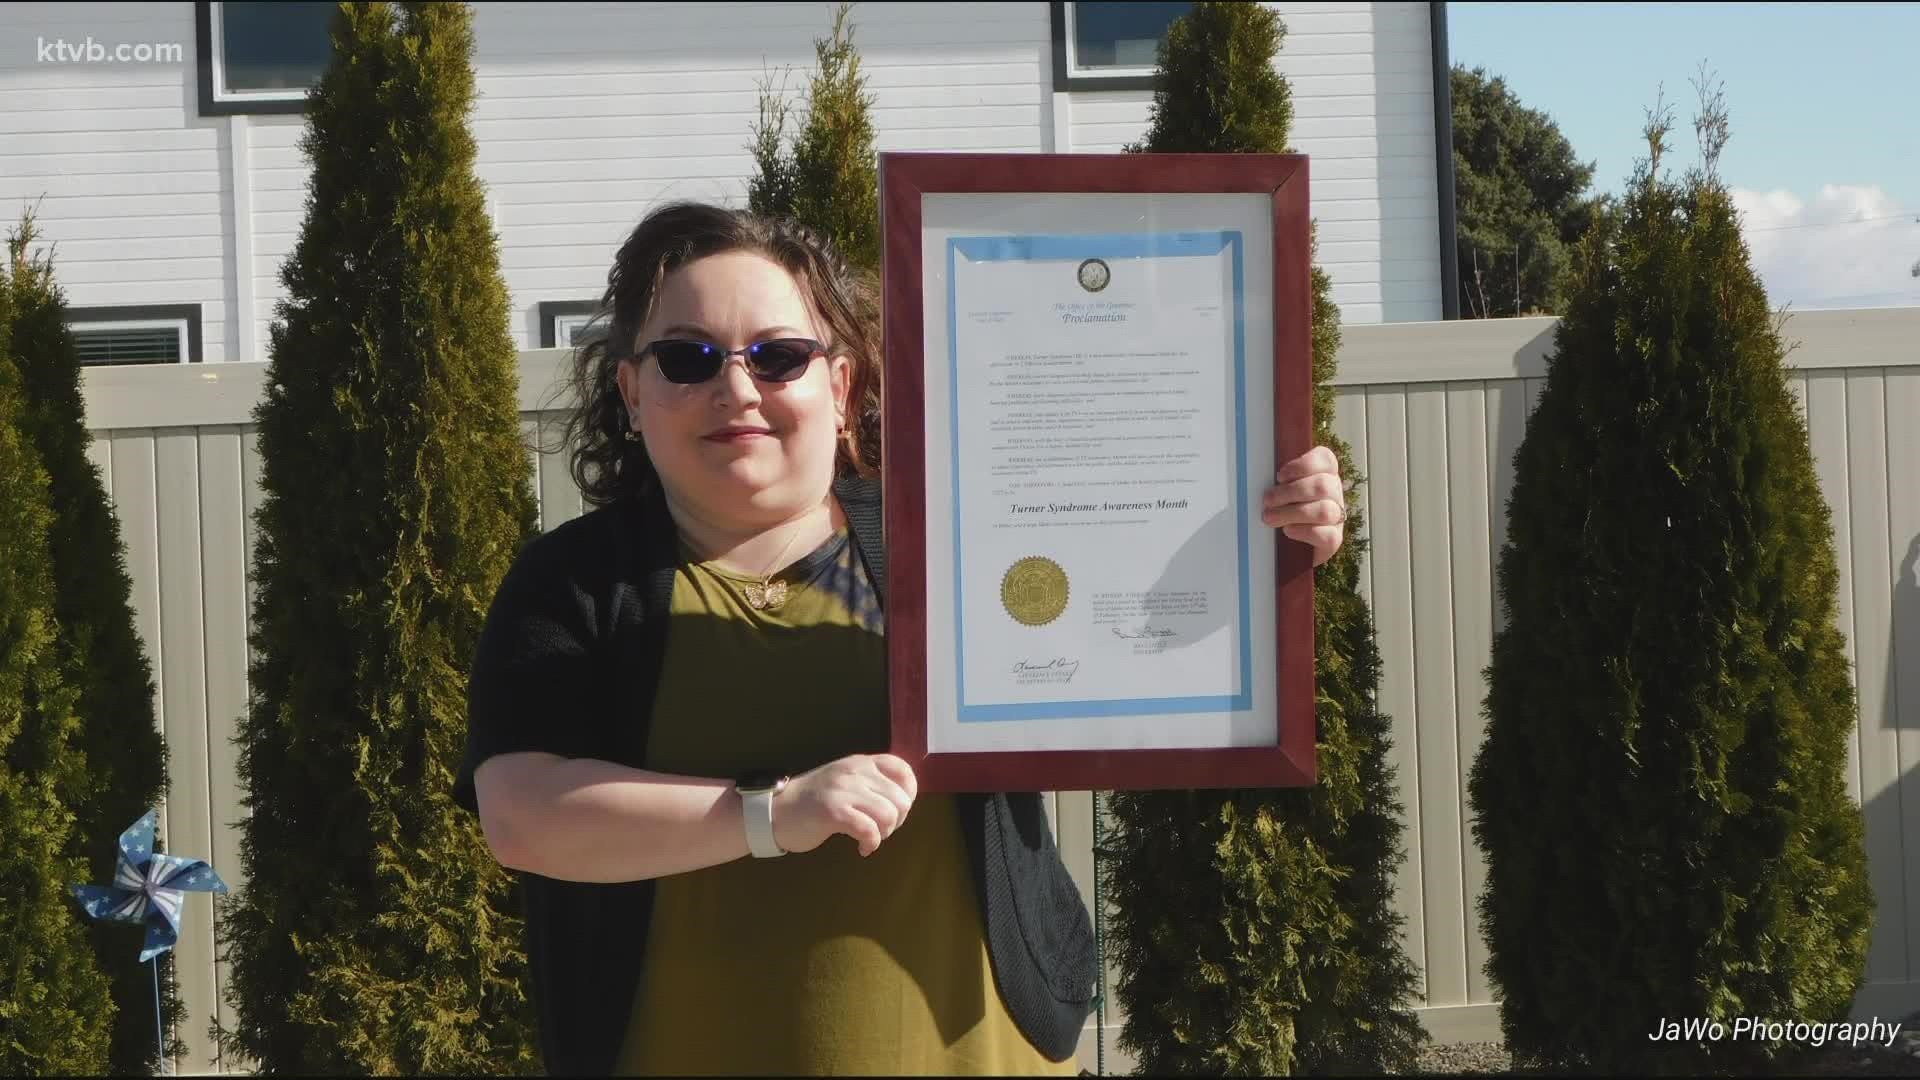 According to the Turner Syndrome Foundation, 408 women are impacted by Turner Syndrome in Idaho. A local woman's letter to Gov. Brad Little increased awareness.